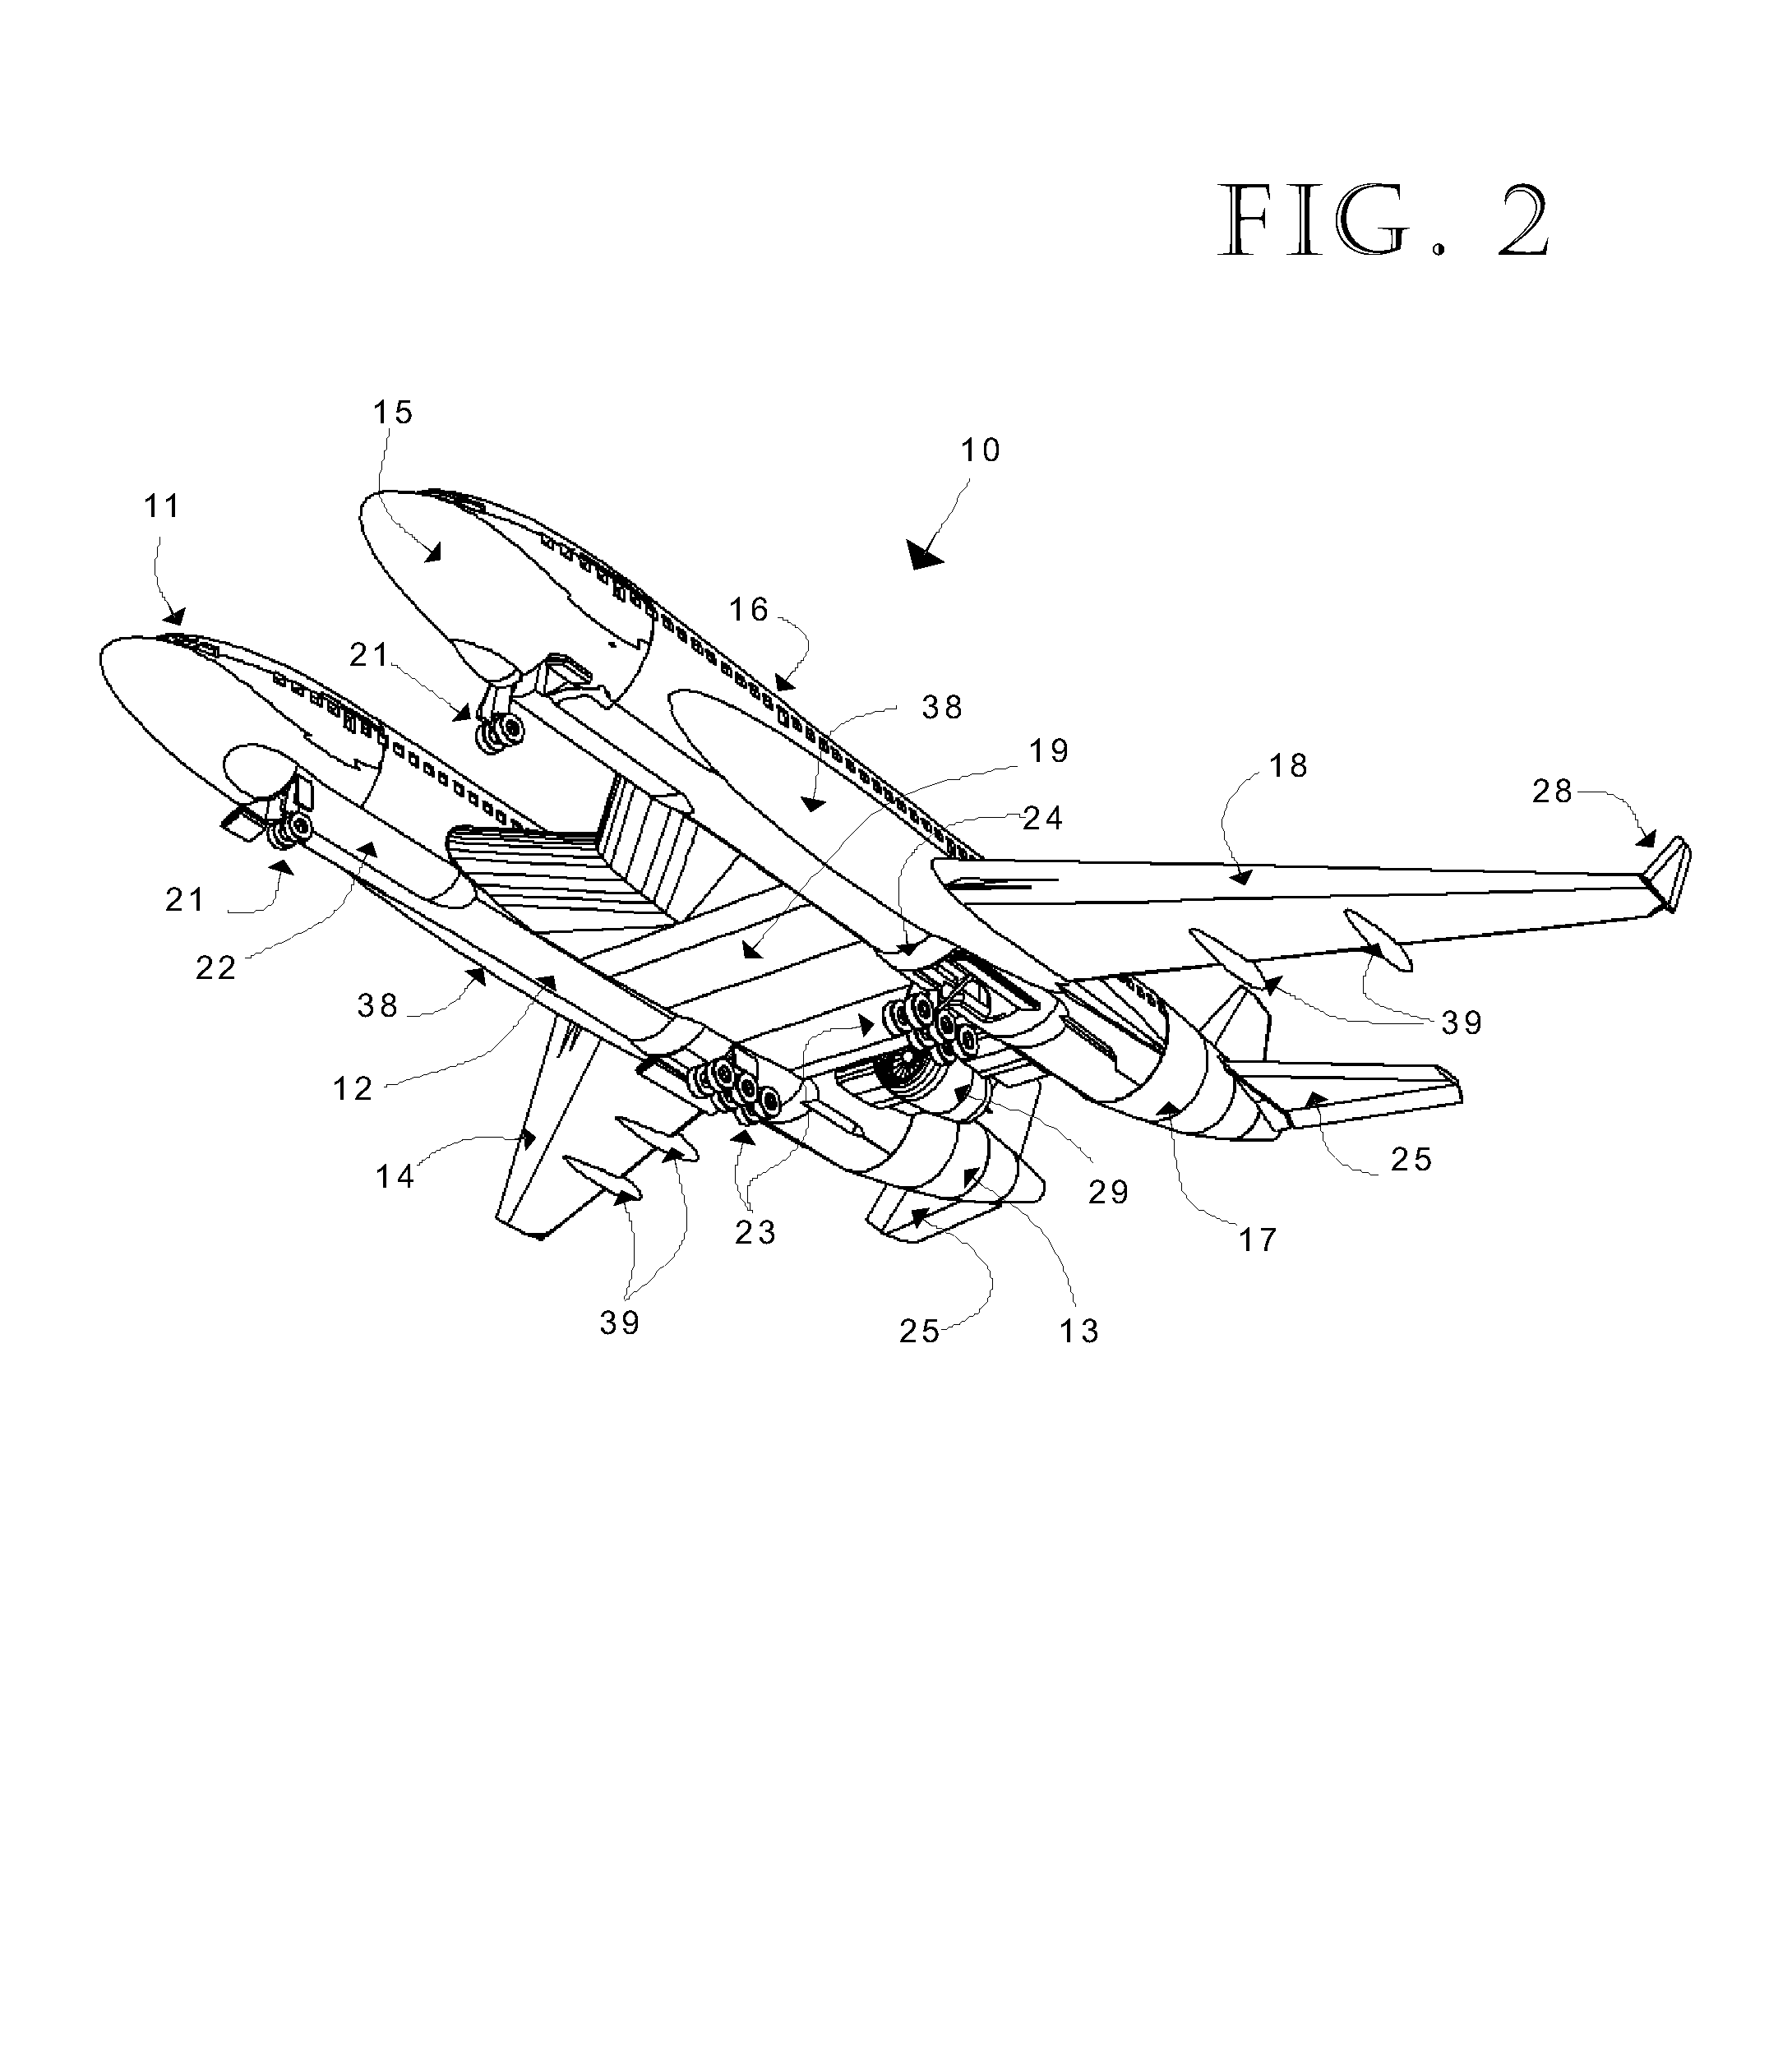 Cross-wing Twin-Fuselage Aircraft